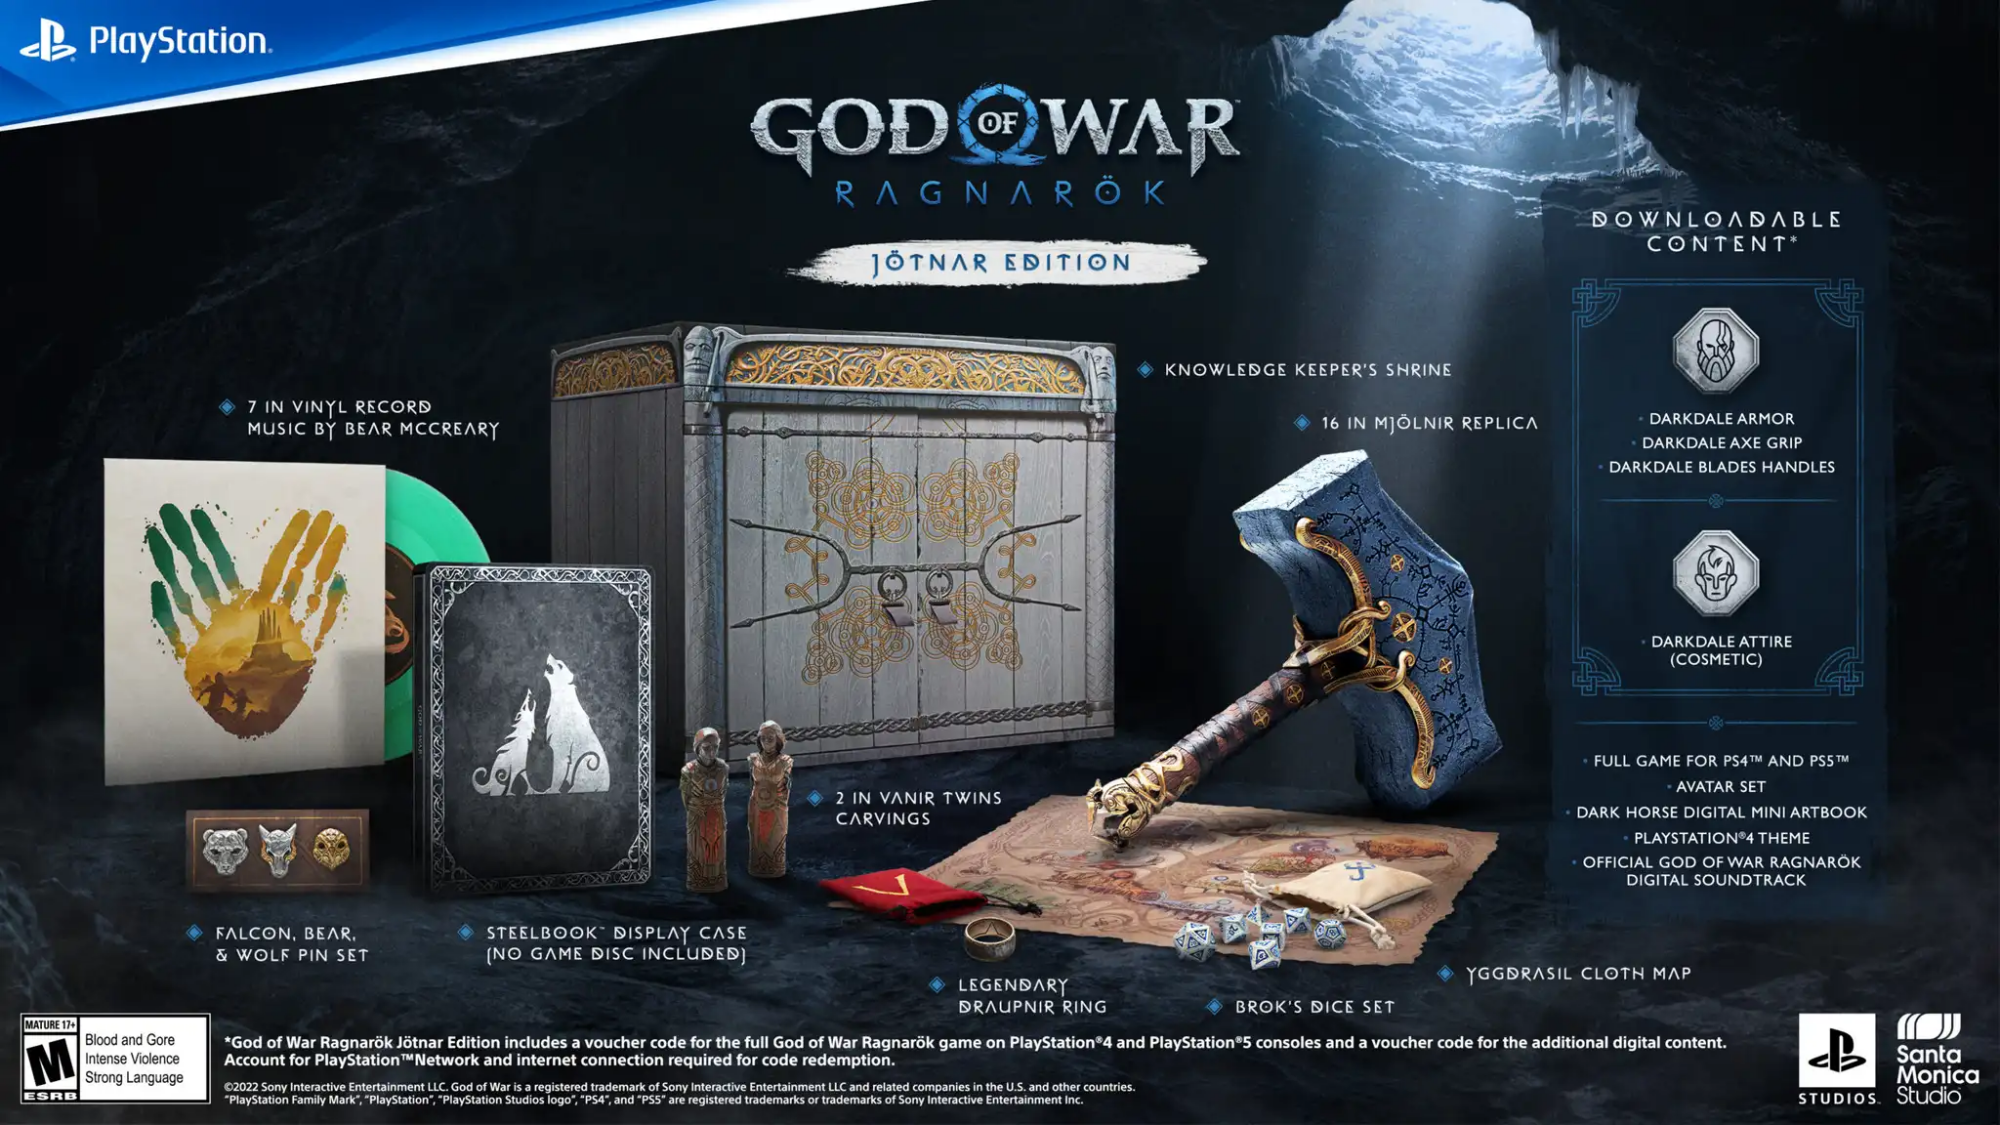 a preview of the bonuses included with "god of war ragnarok" jotnar edition